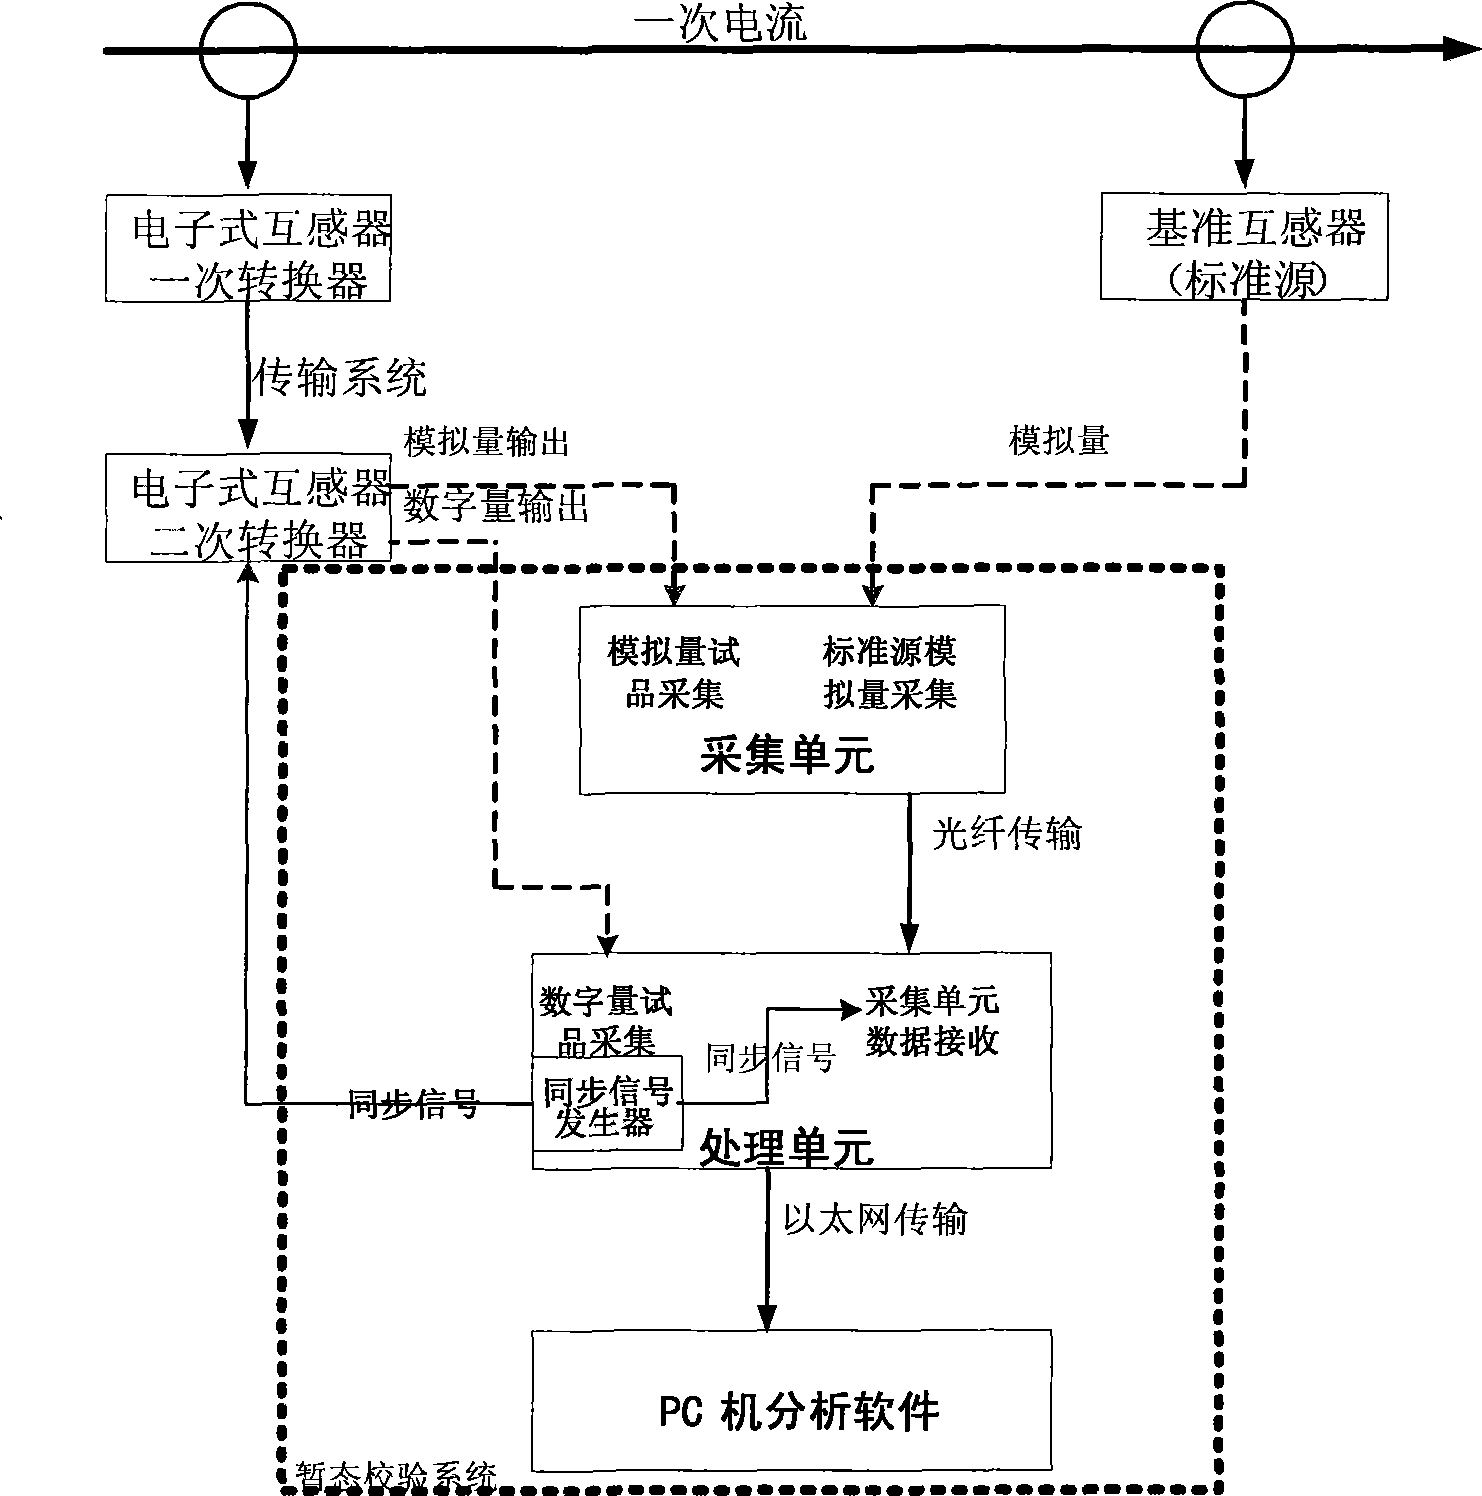 System for verifying transient characteristics of electronic transformer compatible with IEC61850 protocol